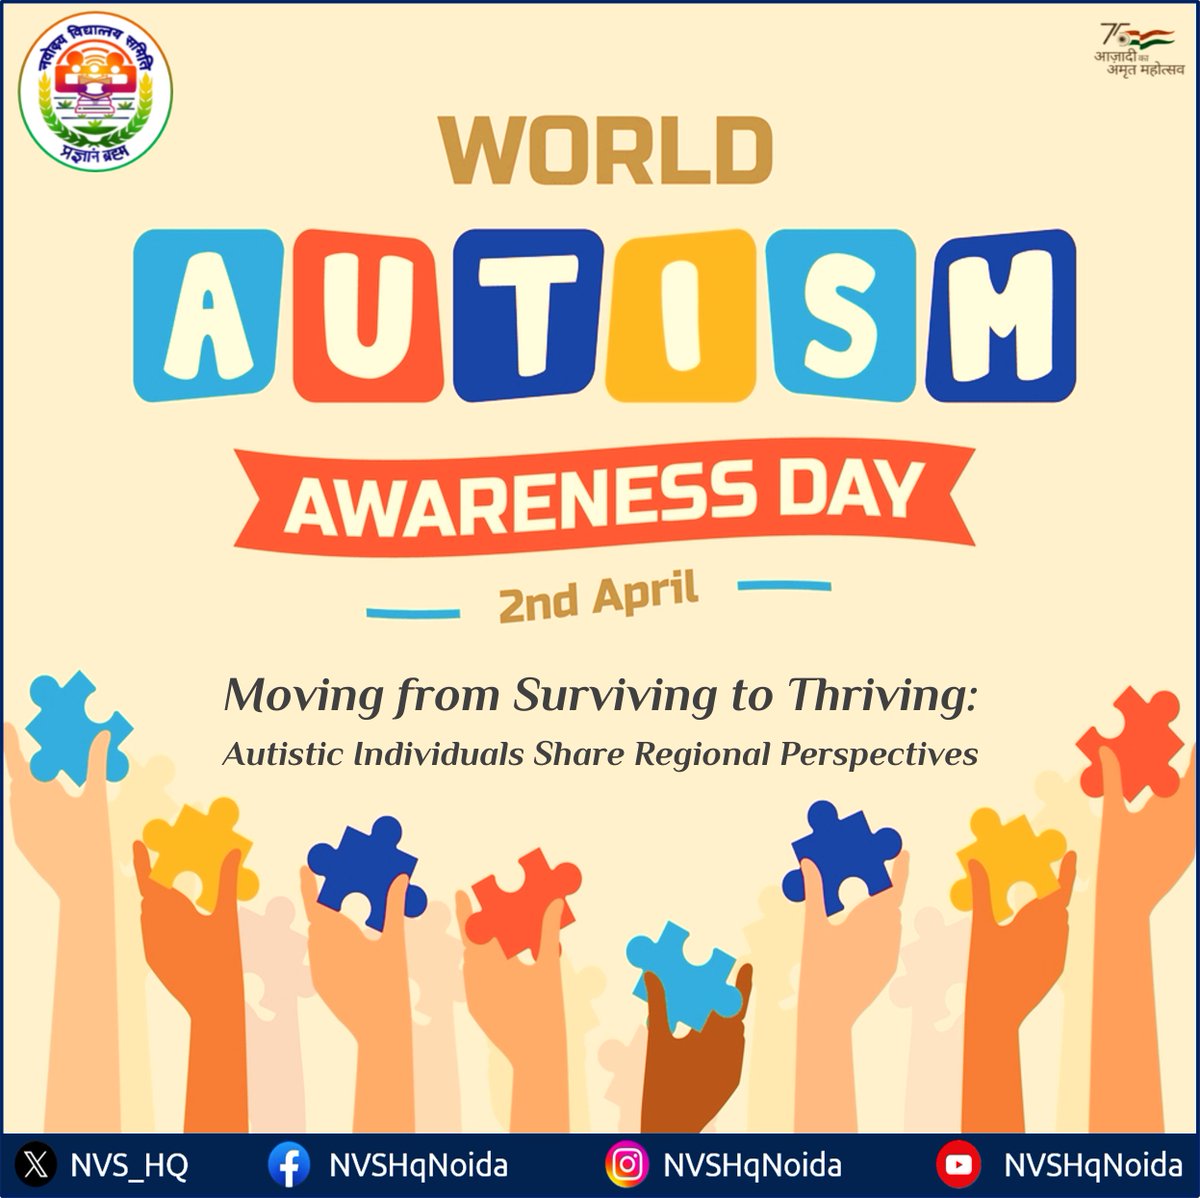 Autism isn't a disability, It’s a different ability that enriches the world with unique perspectives, talents & insights. On #WorldAutismAwarenessDay, Let's embrace neurodiversity, promote inclusion for all and celebrate the beautiful spectrum of humanity. #AutismAwareness #NVS